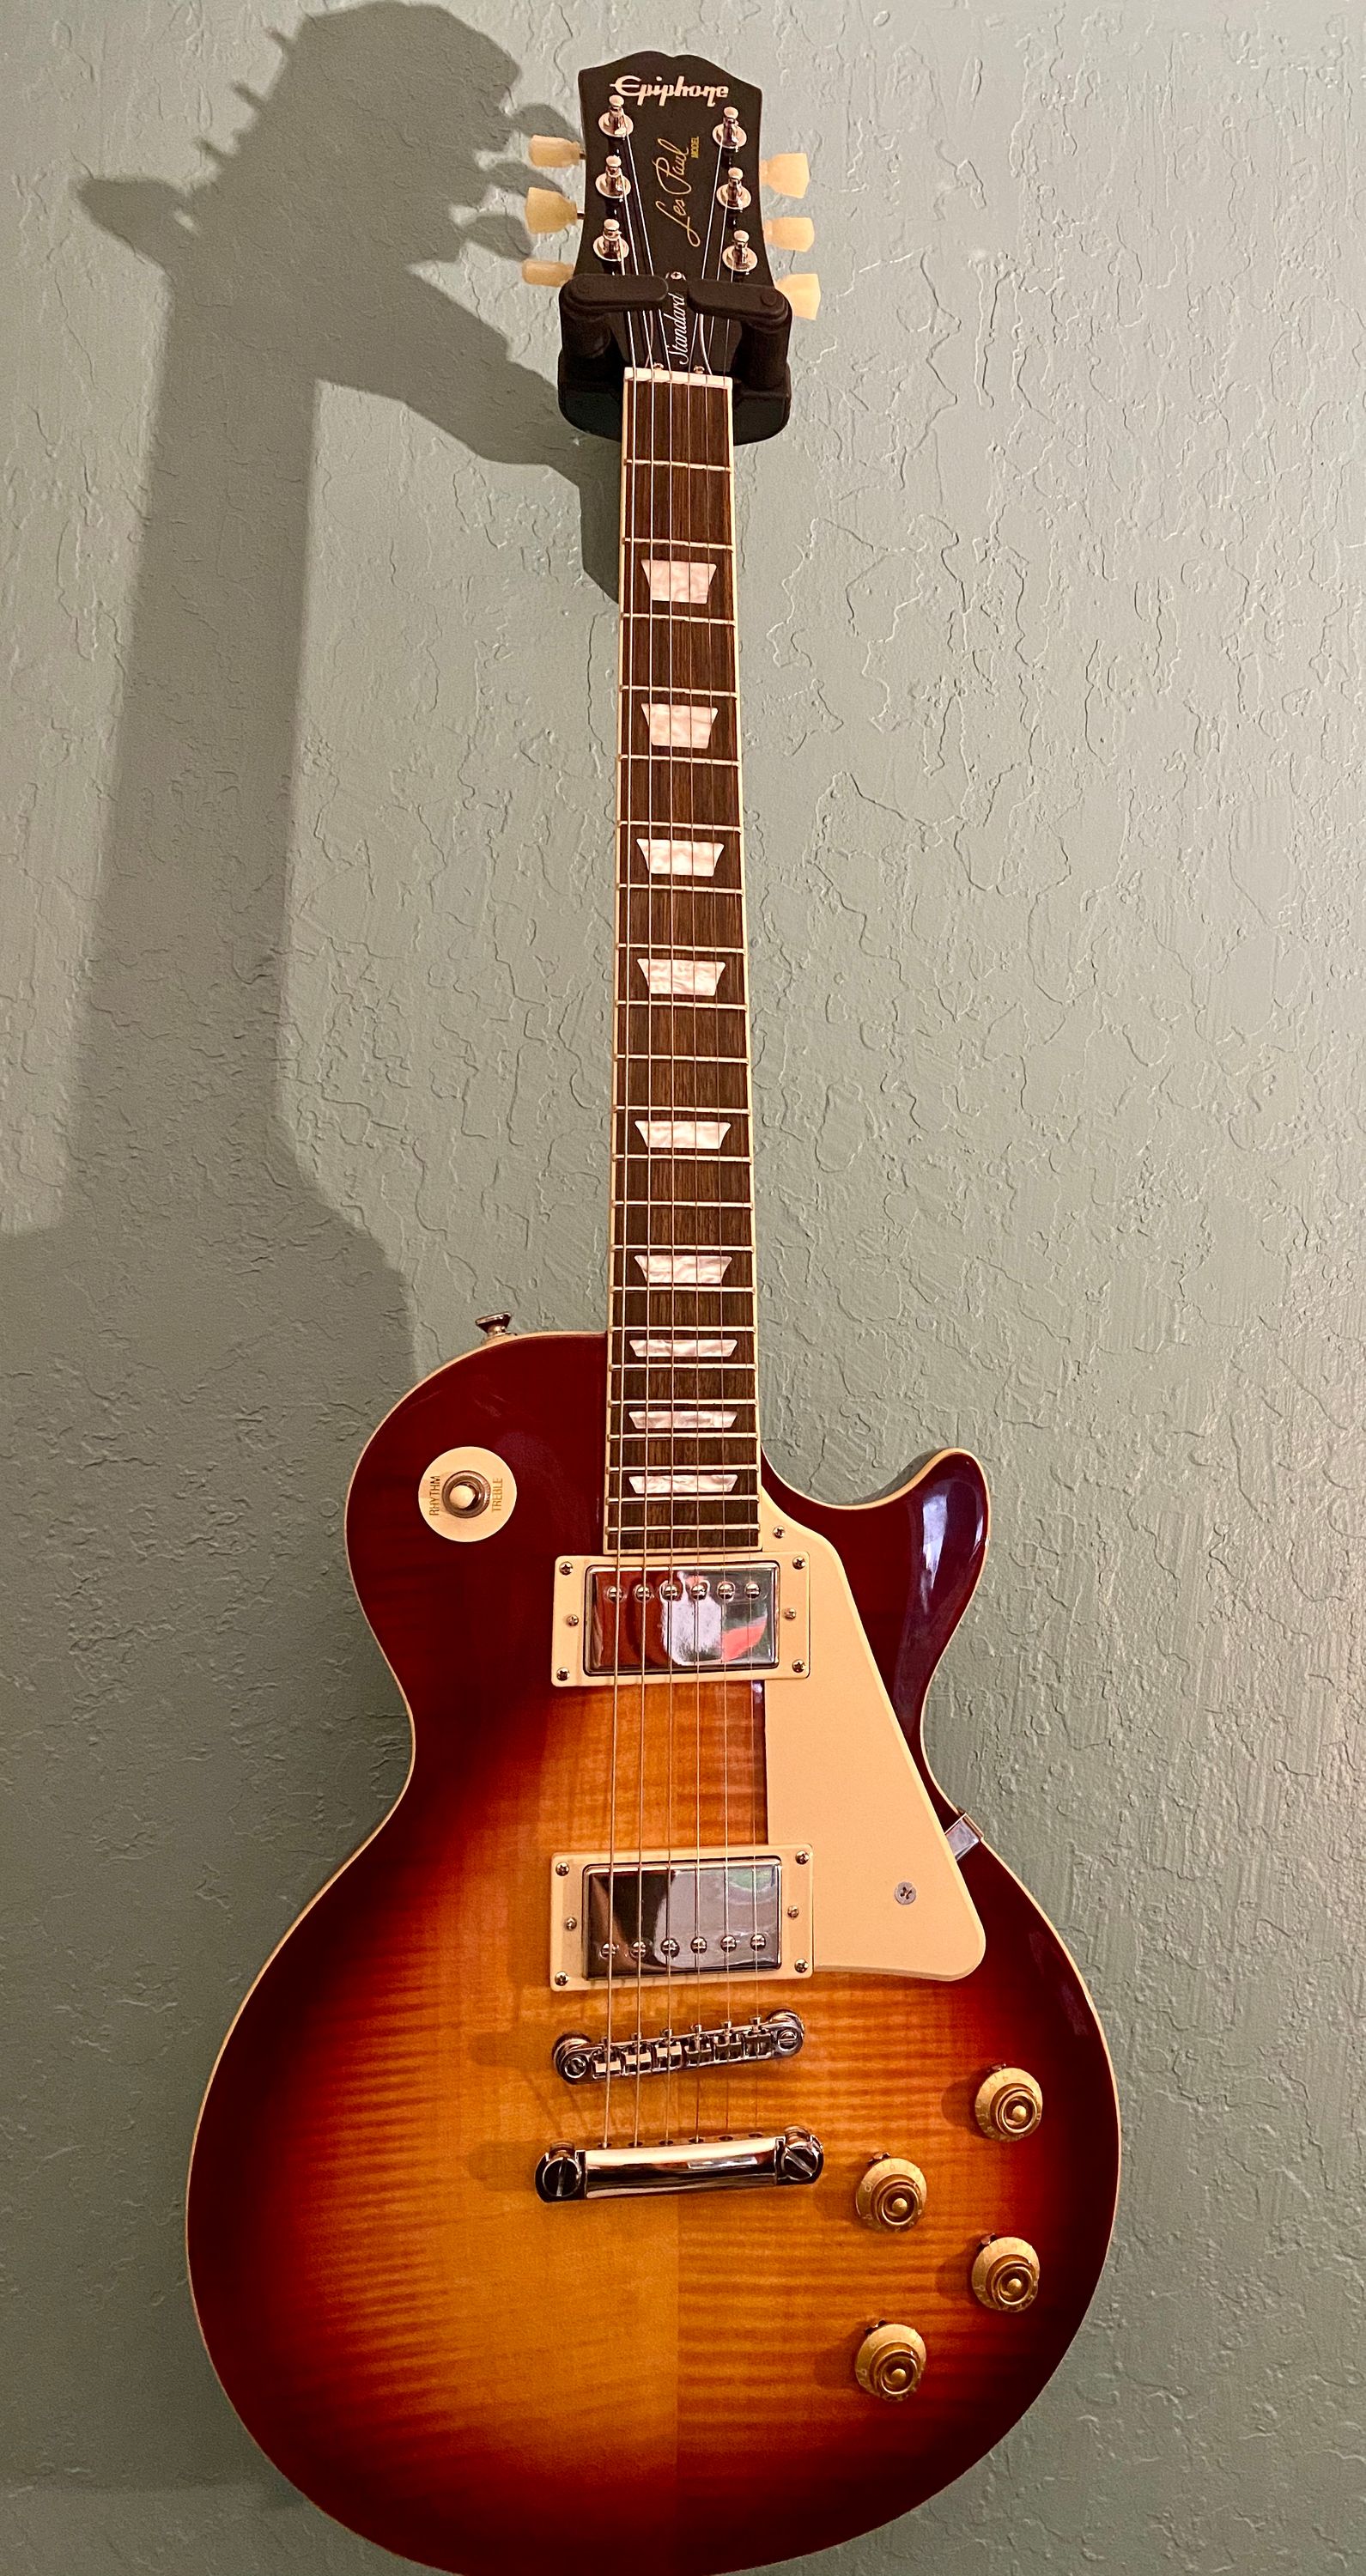 my son’s new guitar